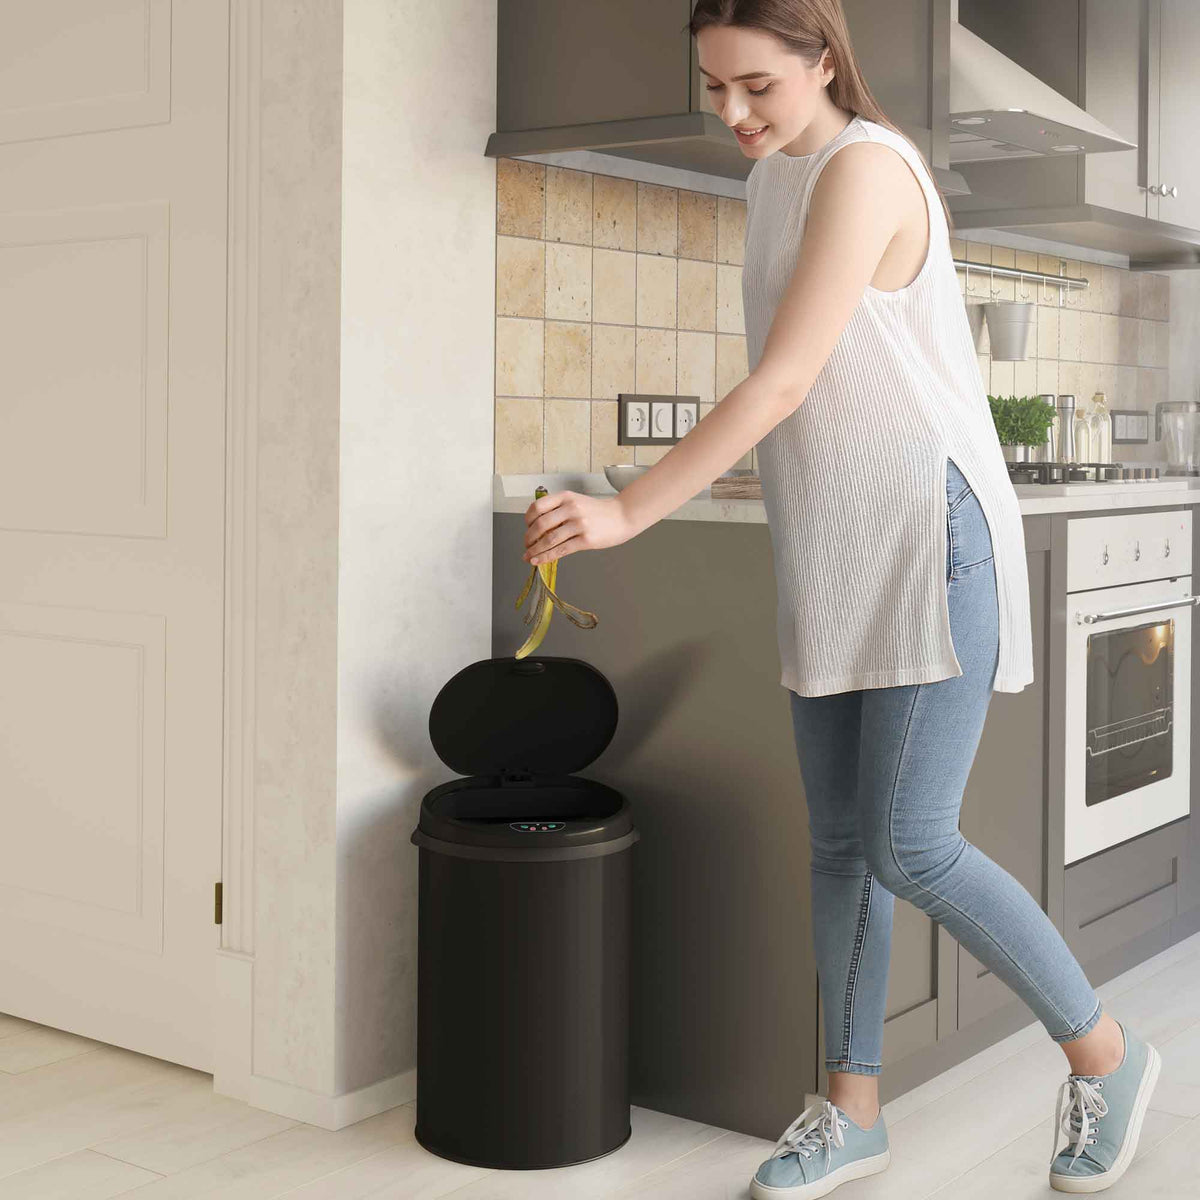 iTouchless 8 Gallon Black Stainless Steel Sensor Trash Can with Odor Filter in kitchen